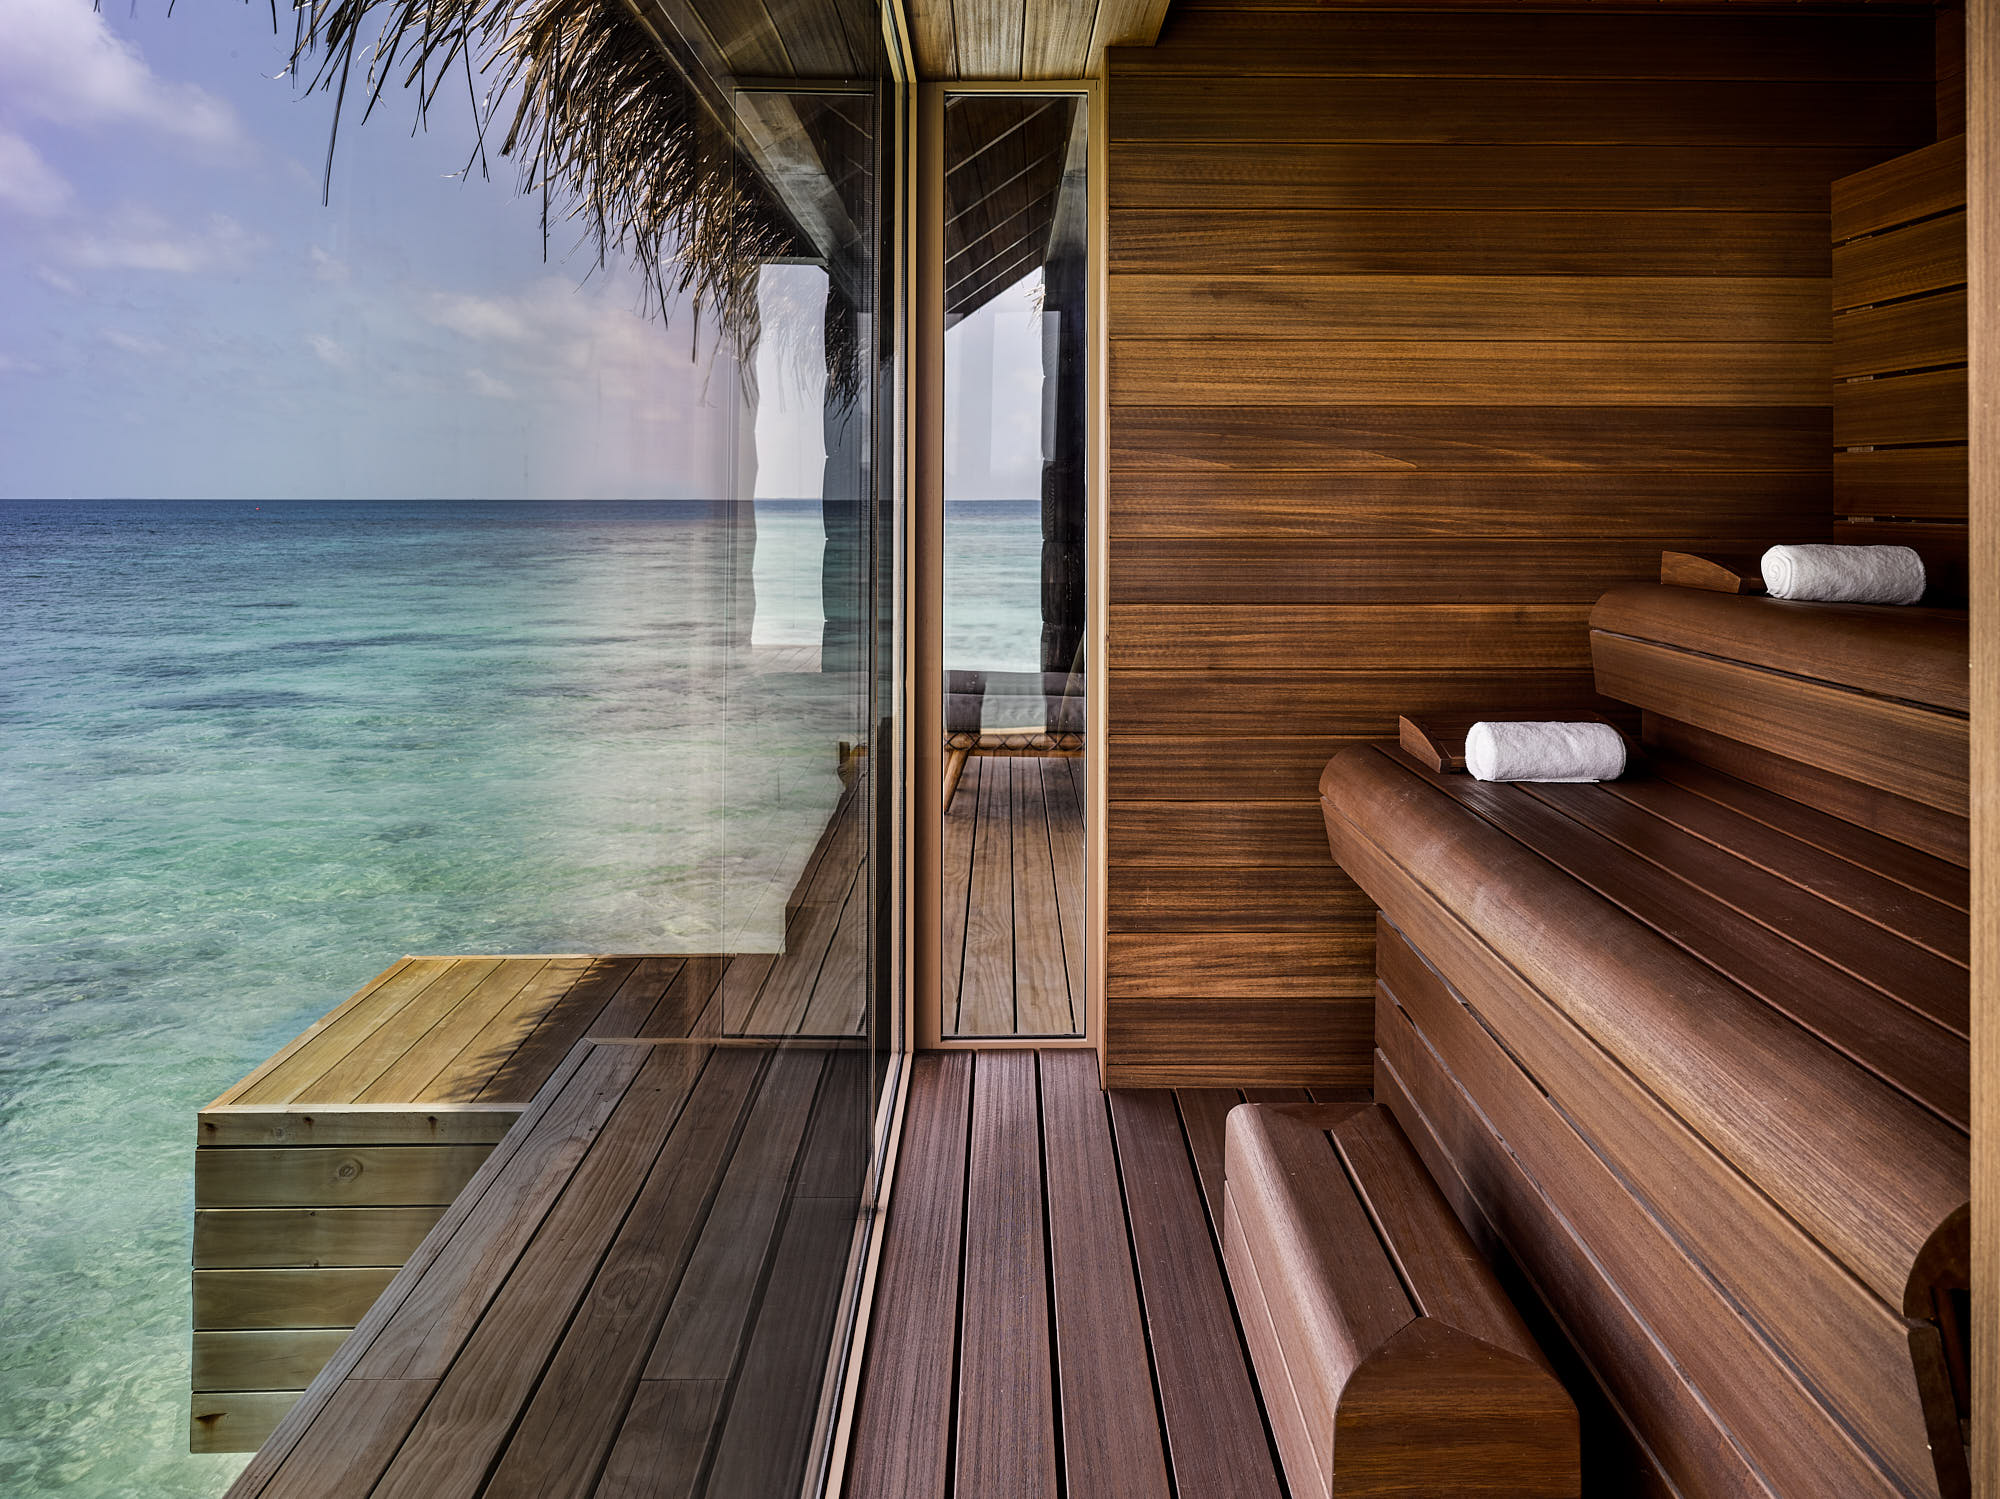 A sauna with a large glass wall looking out onto a calm sea and sunny sky